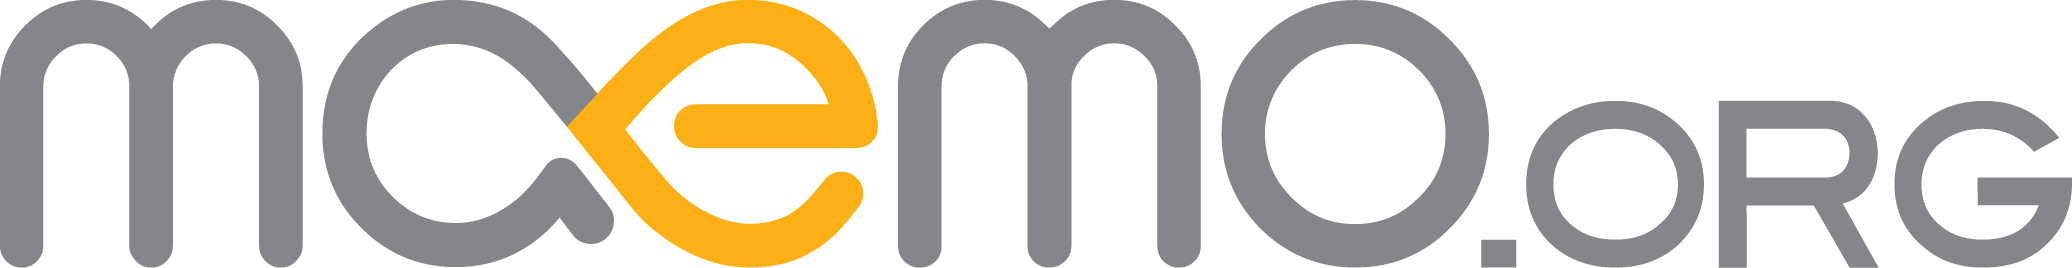 maemo.org logo:  The final version of the maemo.org logo in .pdf (editable)